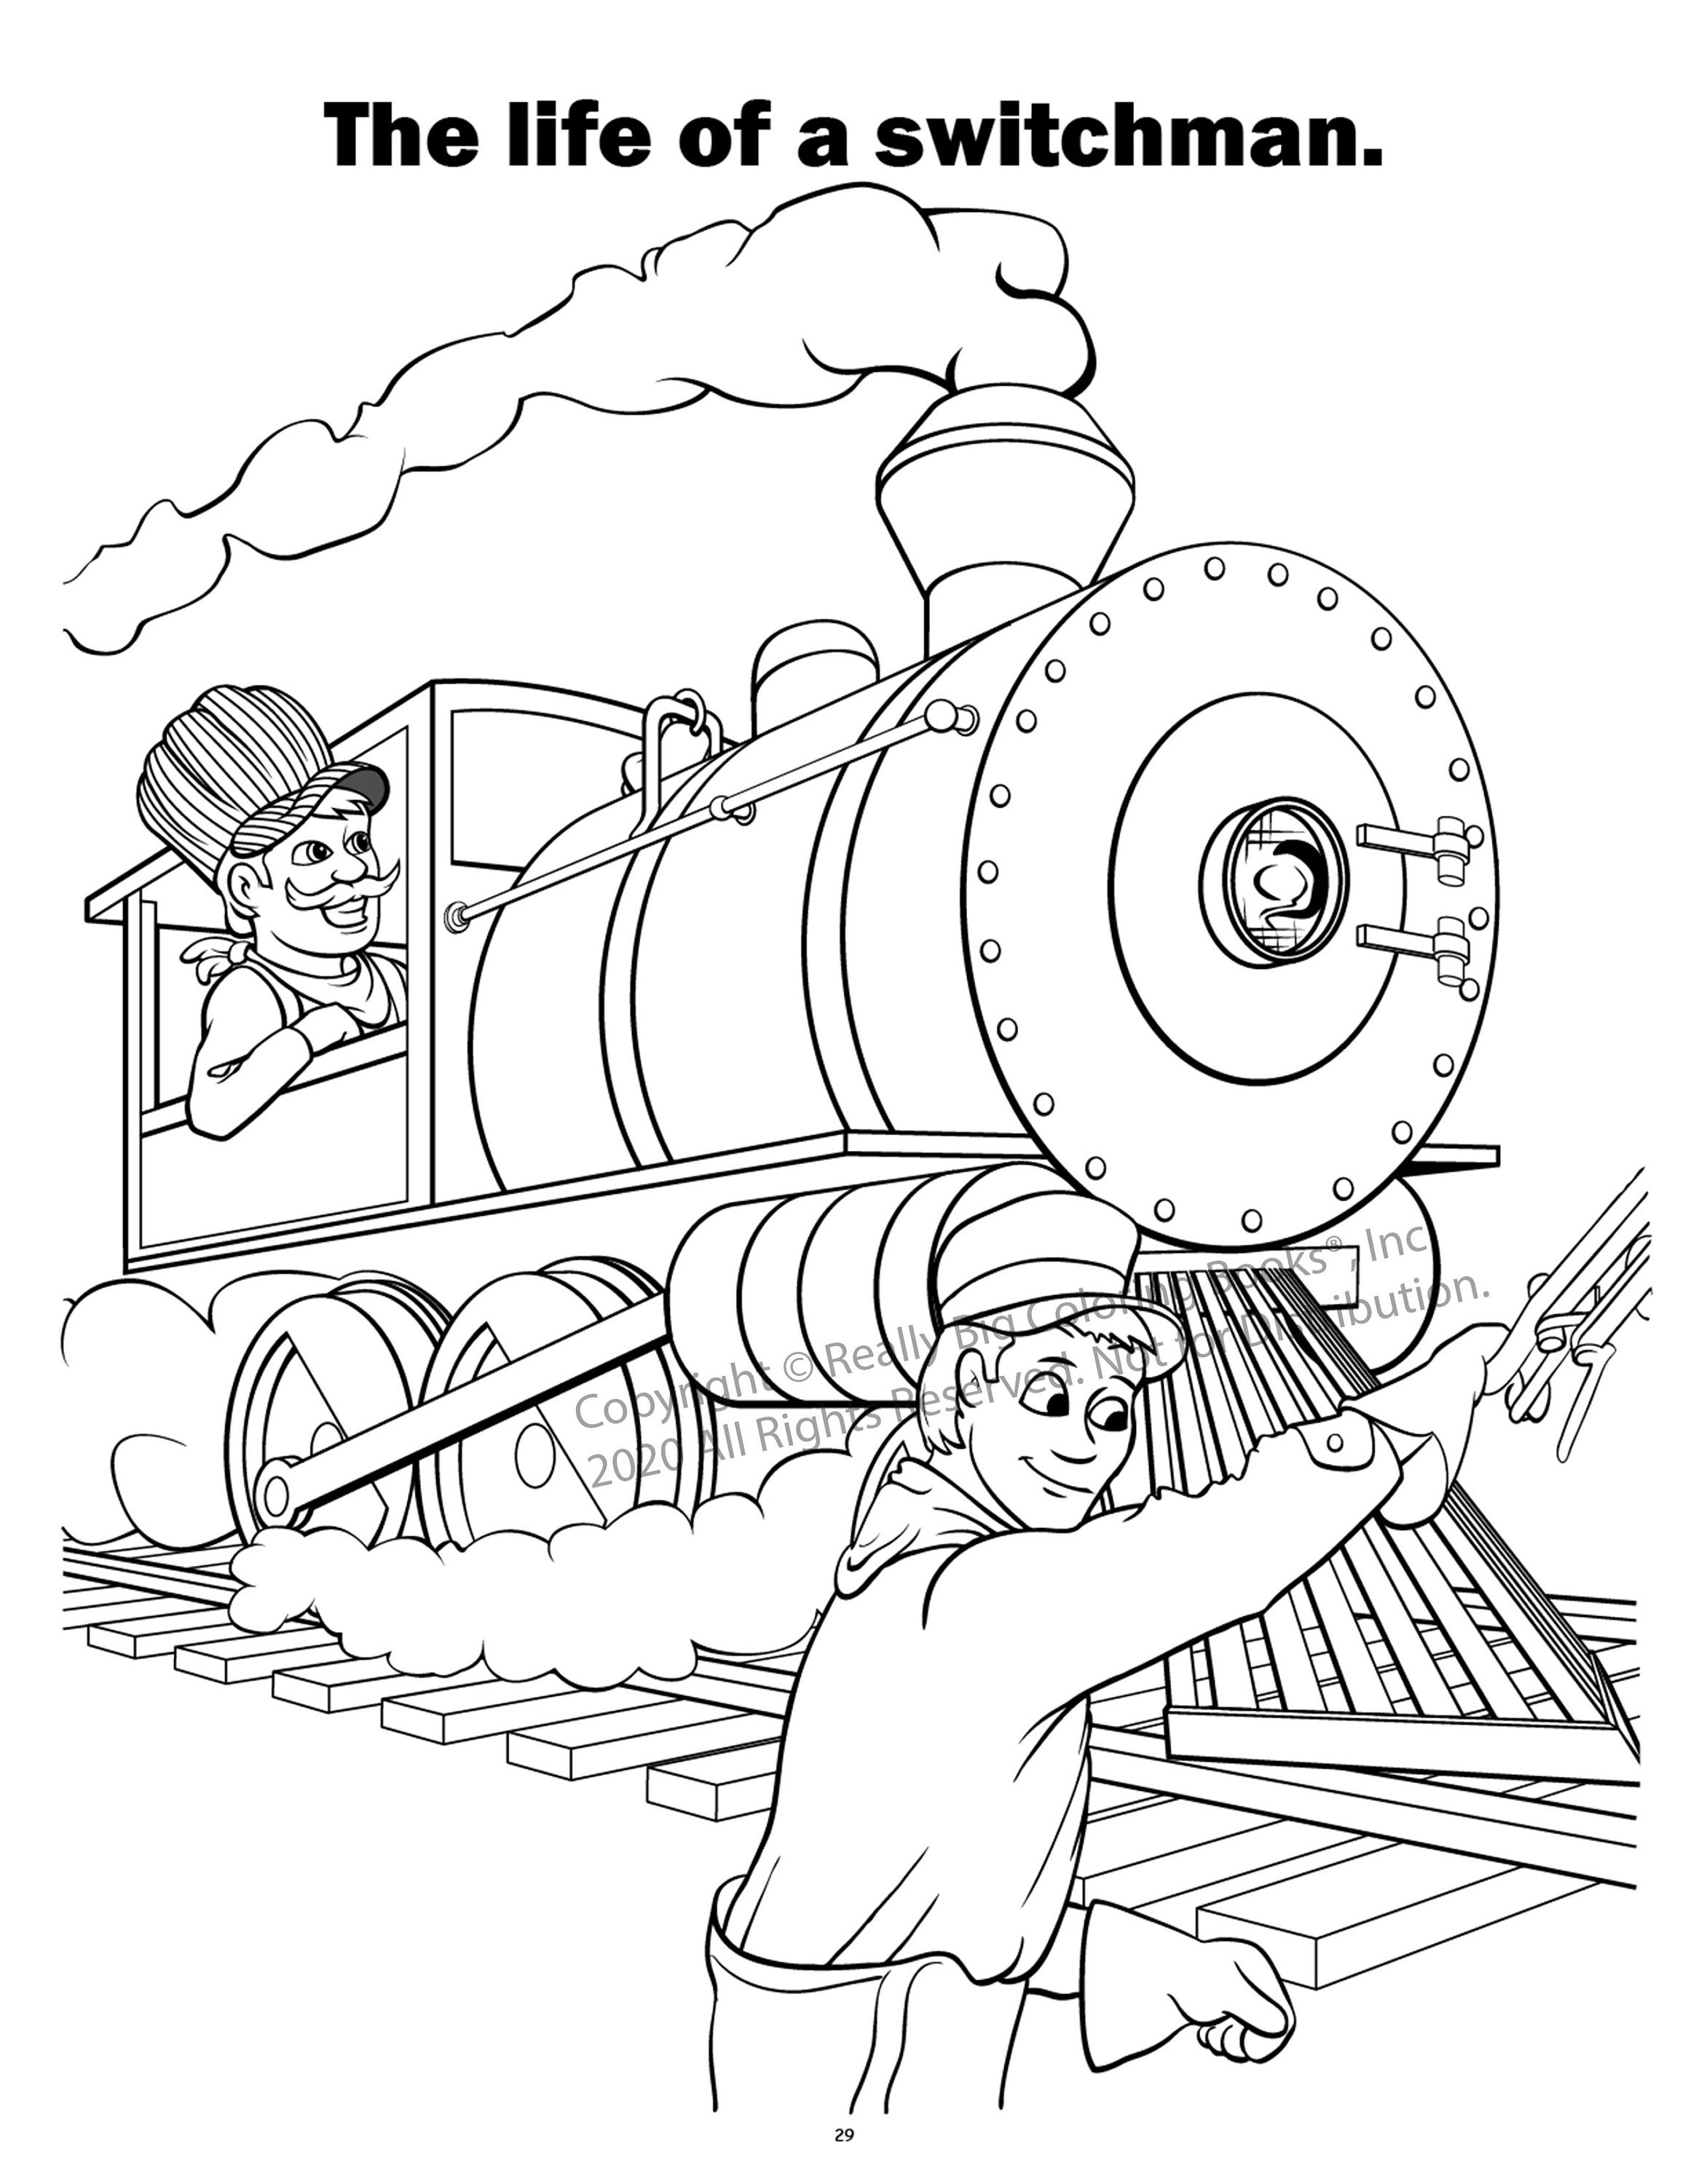 Large Coloring Book for kids Ages 6-12 - Subway Train Crashes - Many  colouring pages (Paperback)